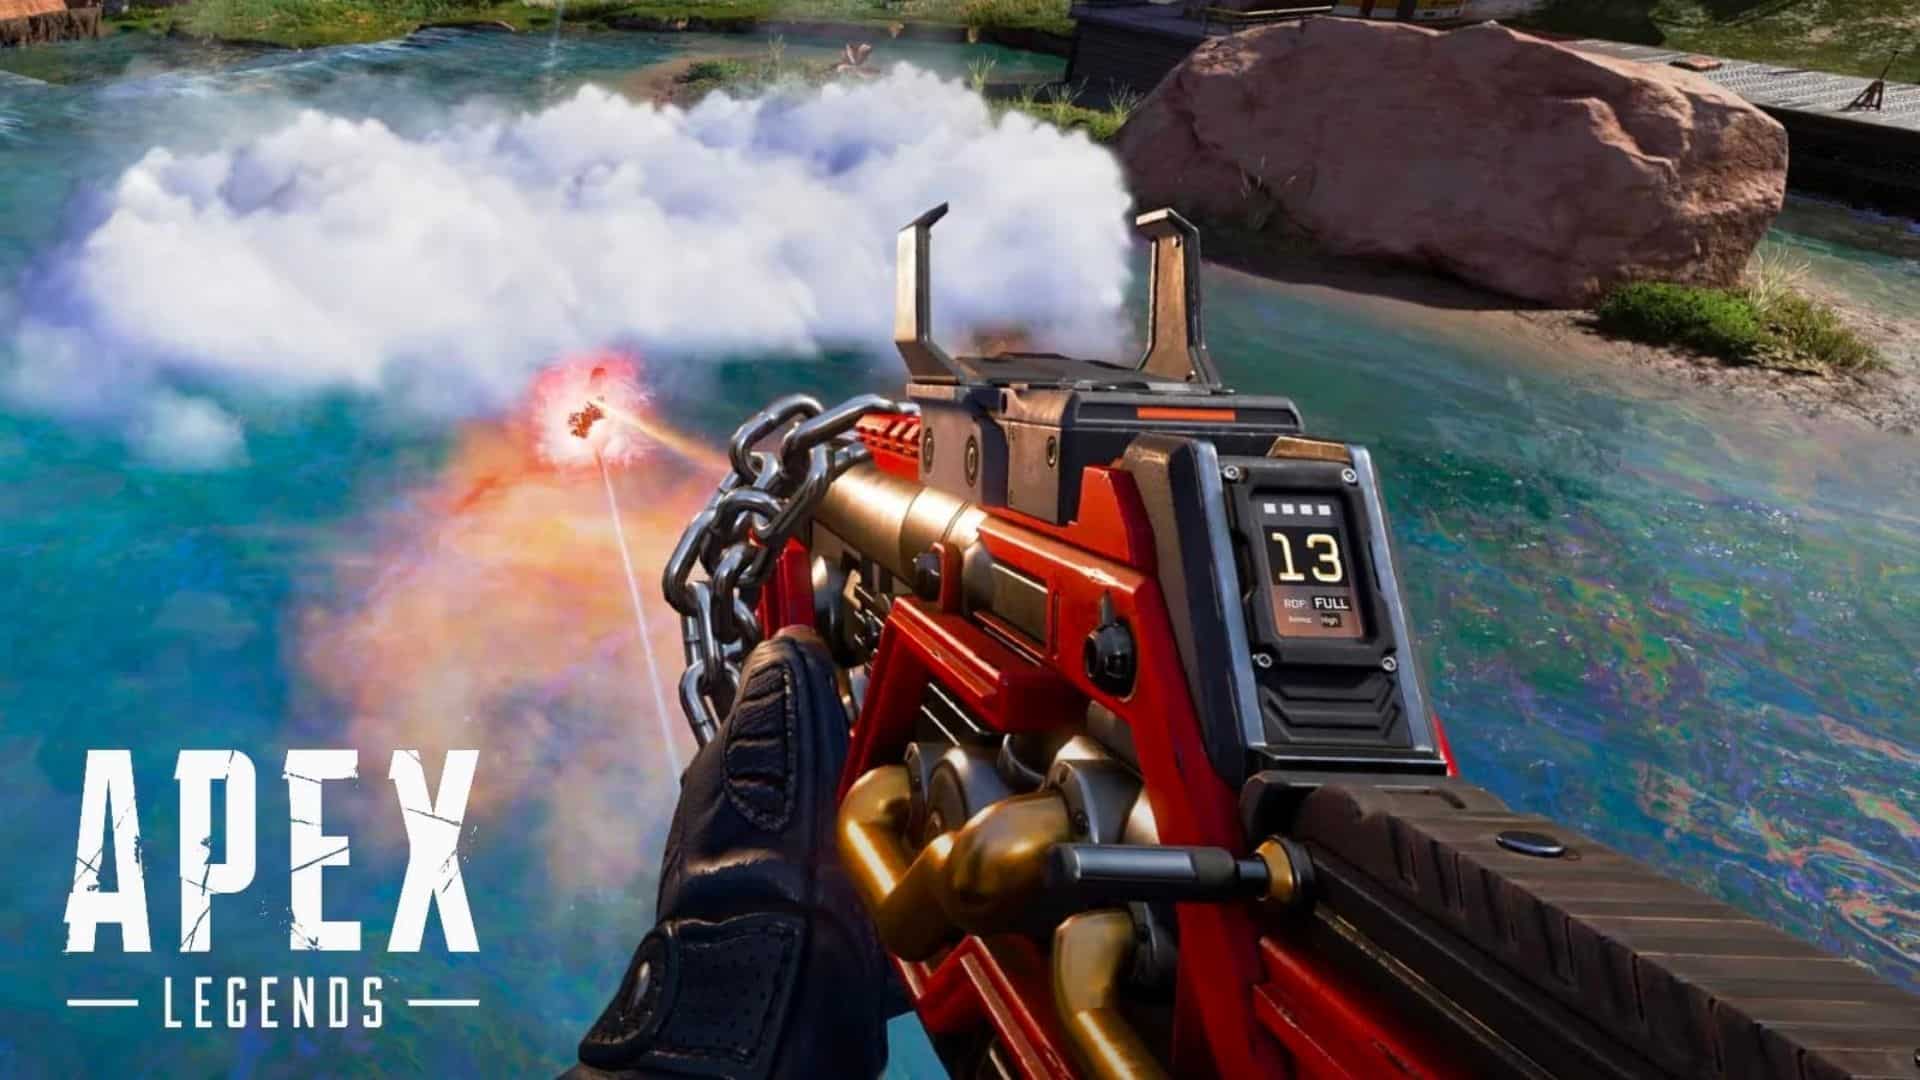 Red Flatline being shot into a puff of smoke in Apex Legends